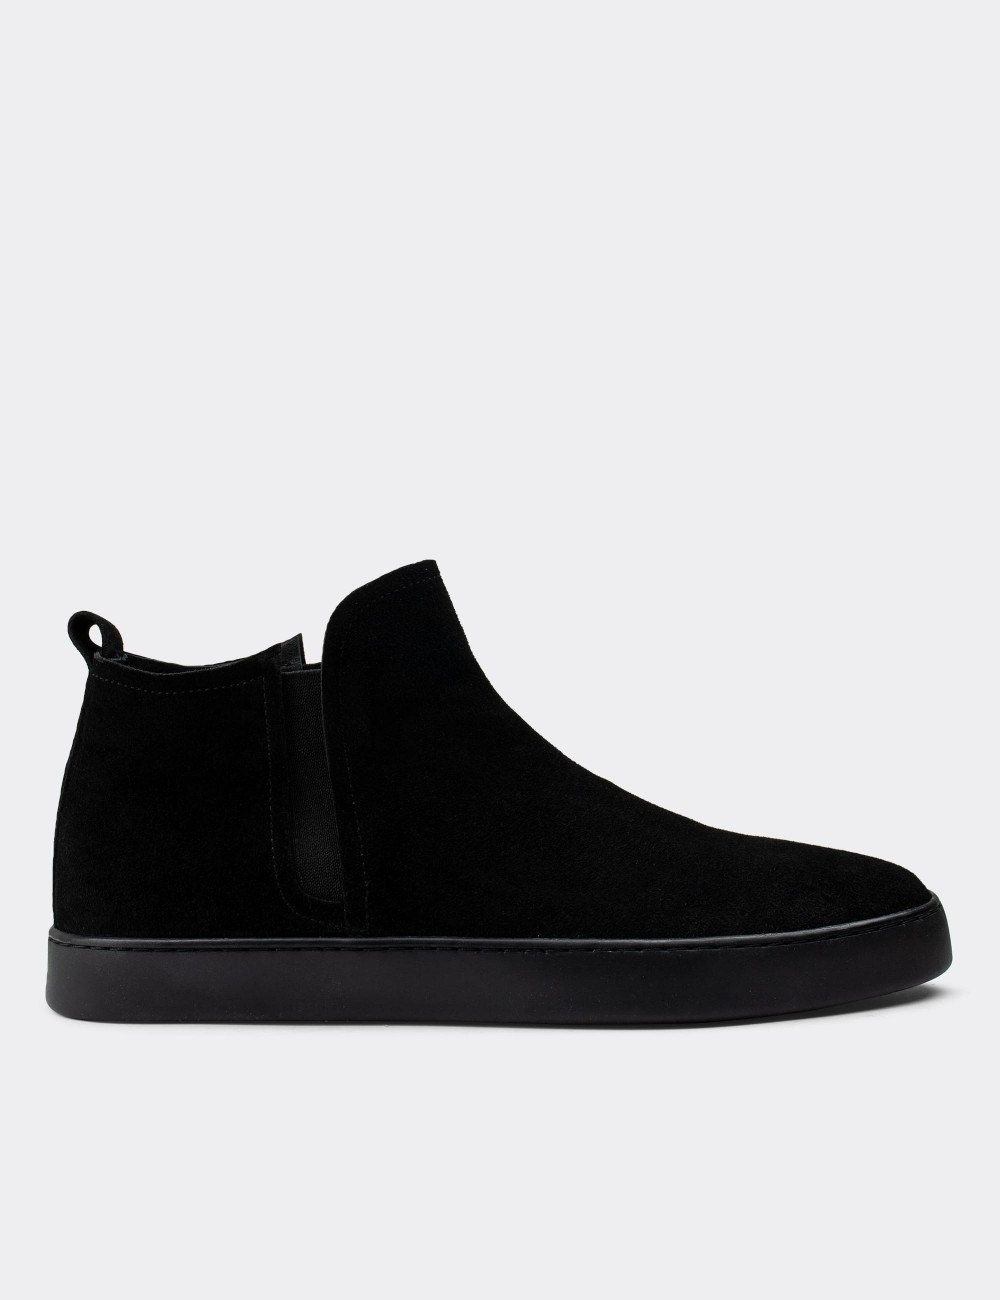 Black Suede Leather Sneakers - 01864MSYHC01